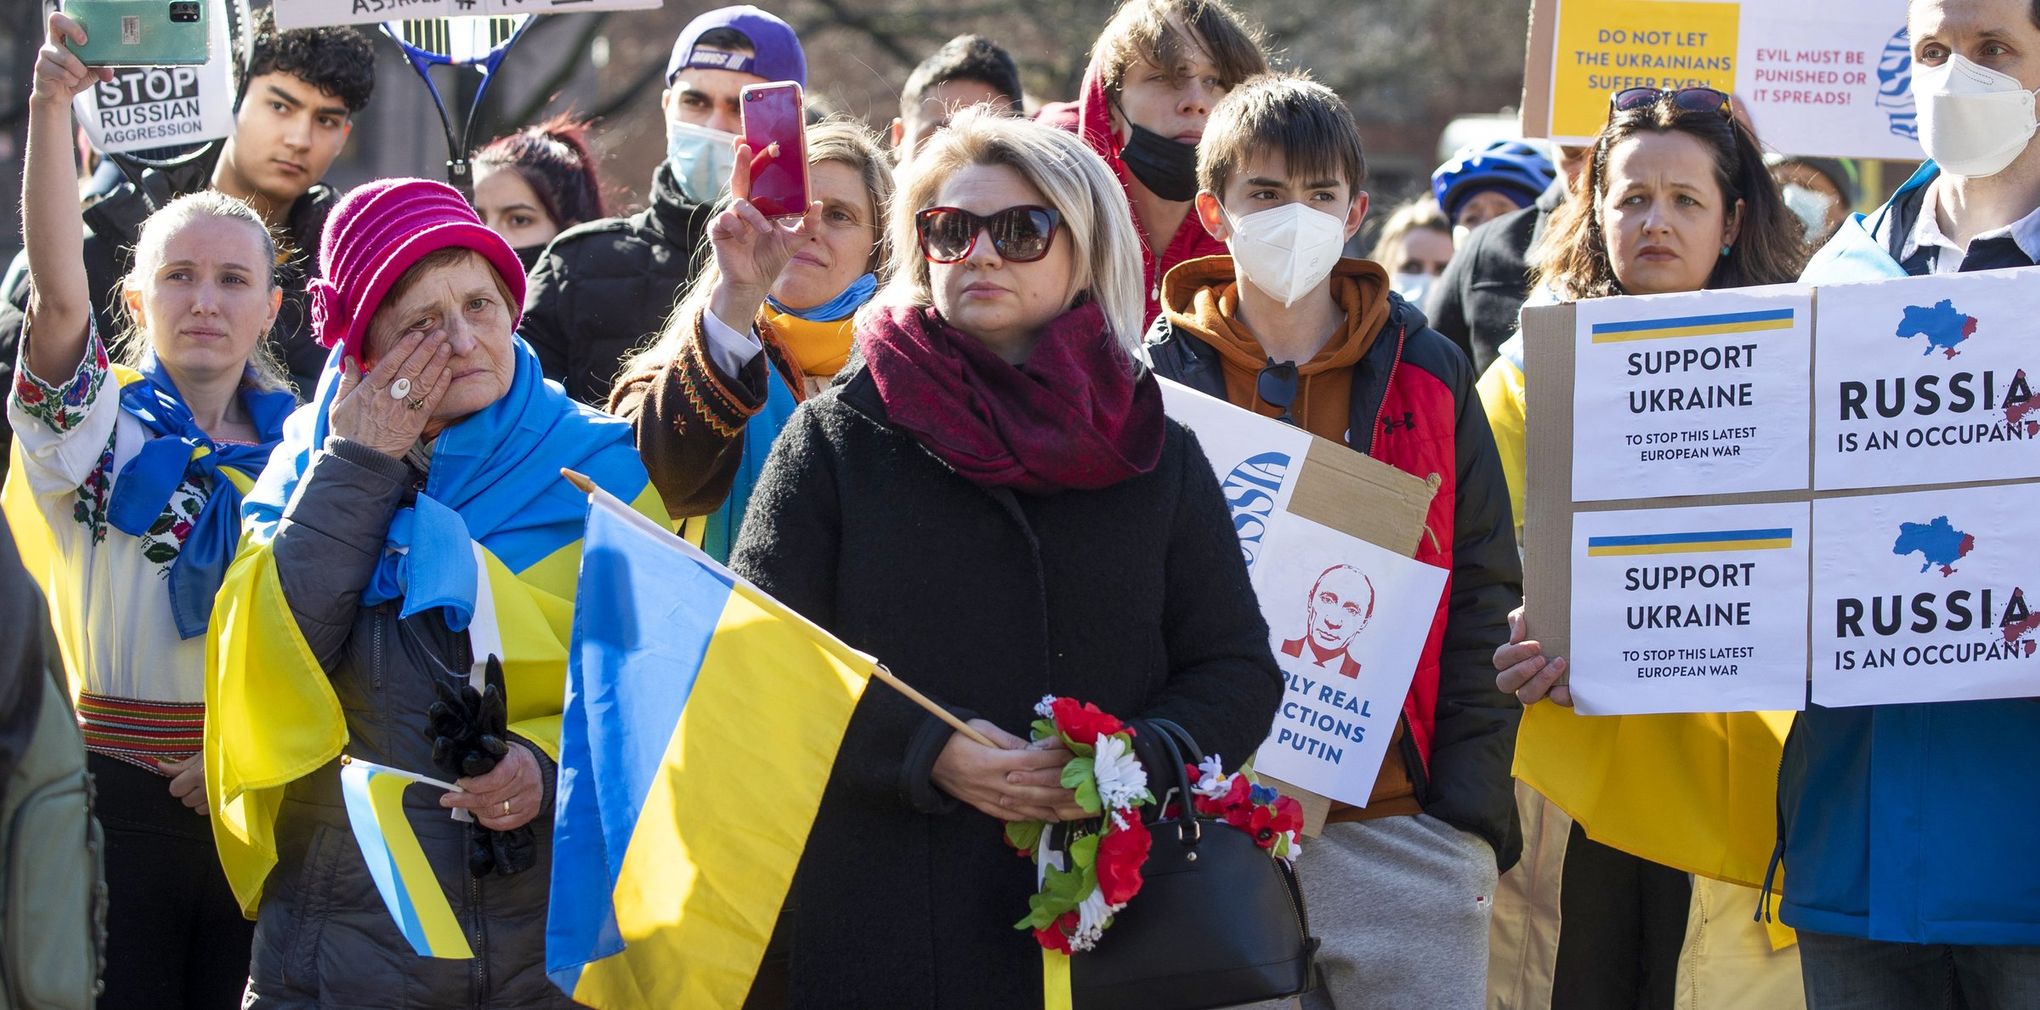 A group of people holding signs and flags rally against the war in Ukraine at the University of Washington.